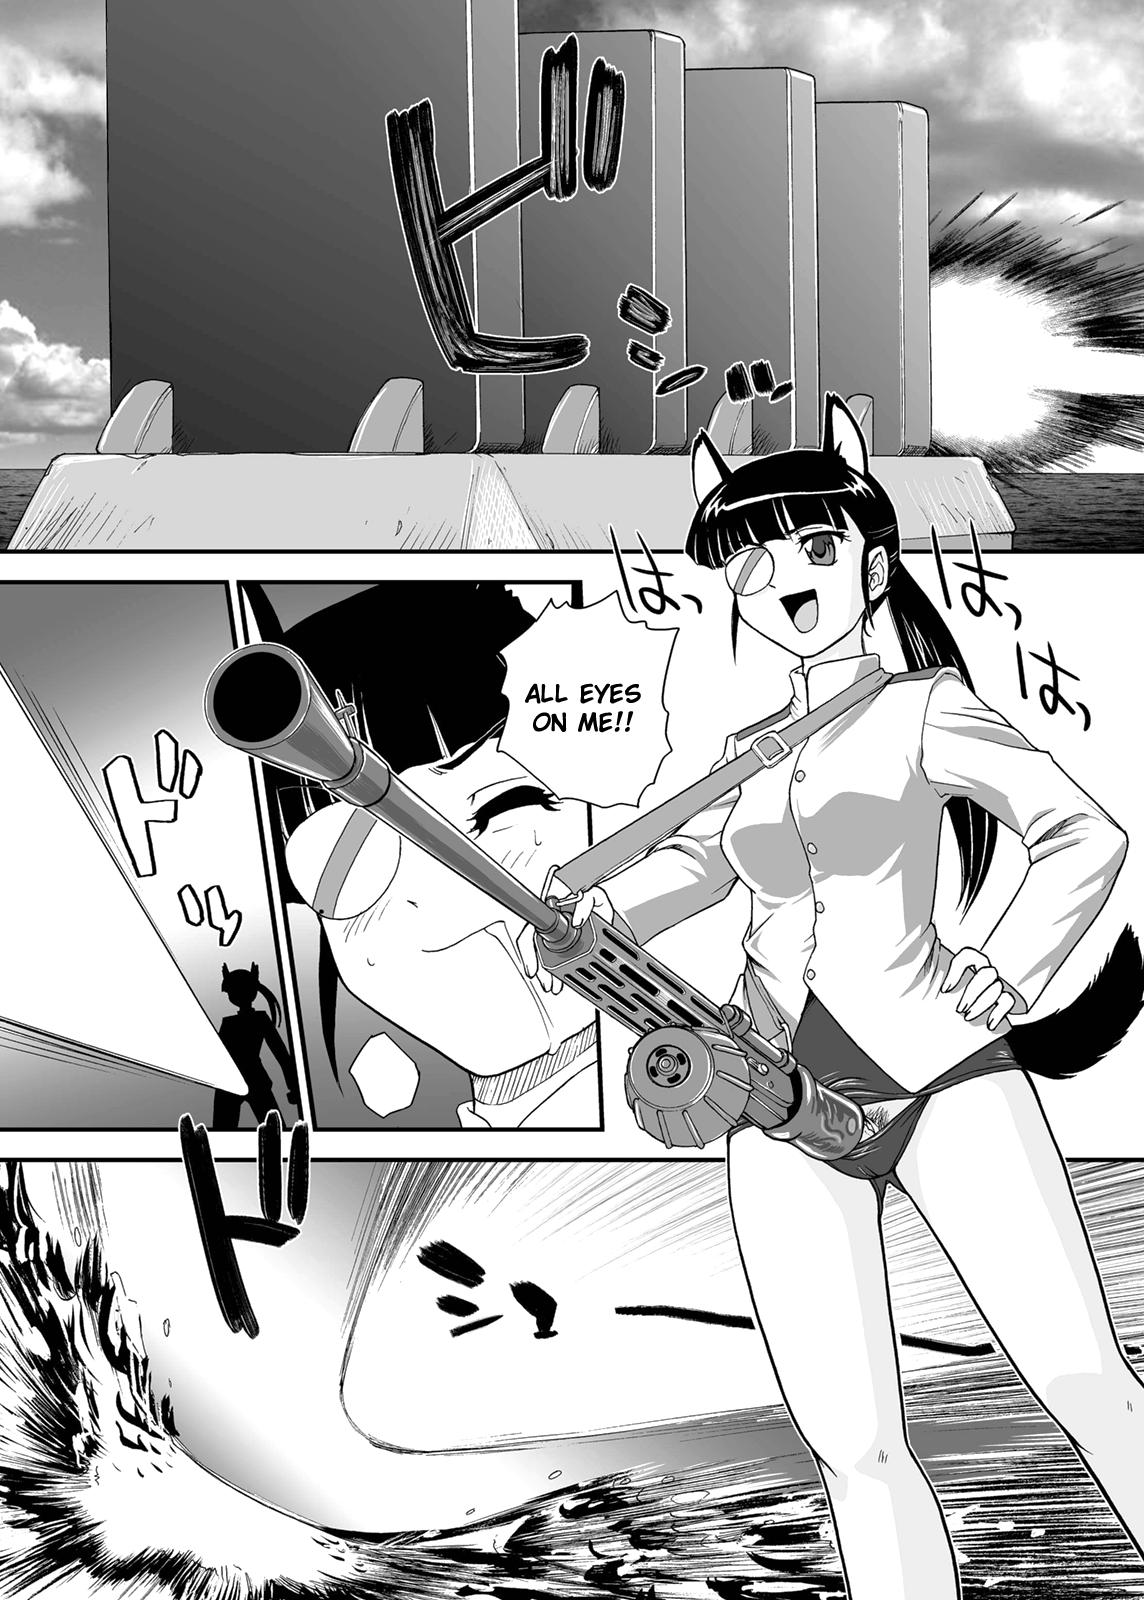 Motel Chin ★ ja Naikara Hazukashiku Naimon!!! | It's Not A Real Dick, So There's Nothing to Be Embarrassed About!!! - Strike witches 18 Year Old Porn - Page 5